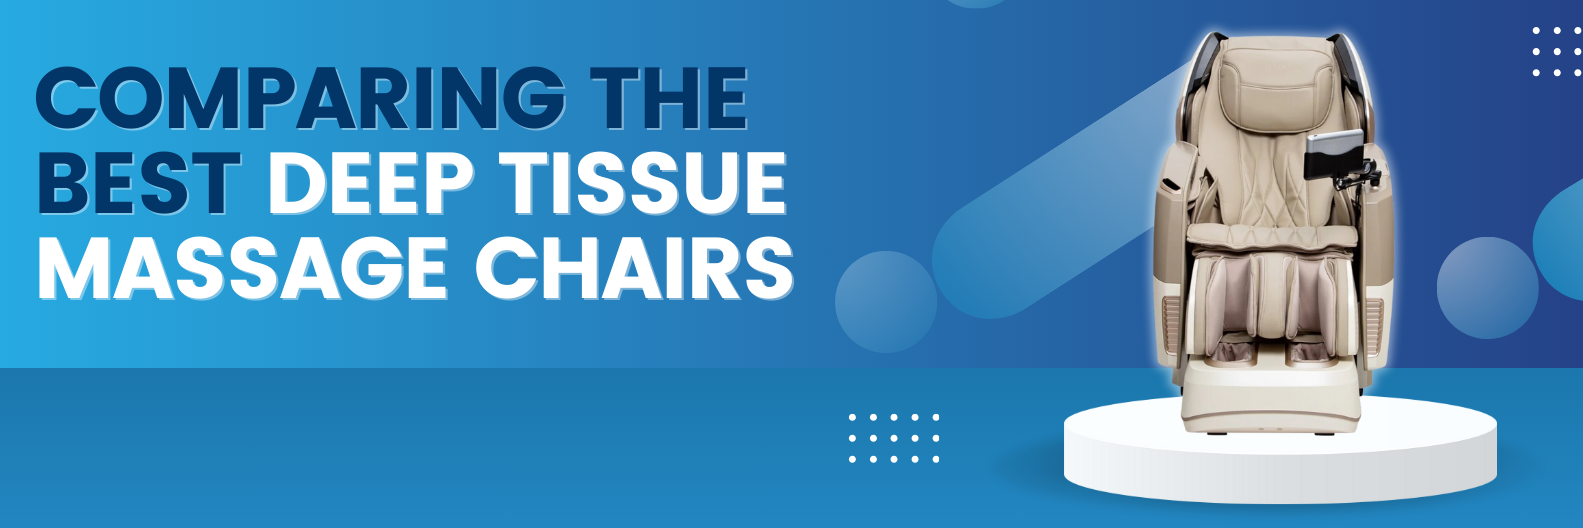 Explore the best deep tissue massage chairs with our comprehensive comparison guide. Find the ideal chair for a relaxing and deep tissue massage experience.